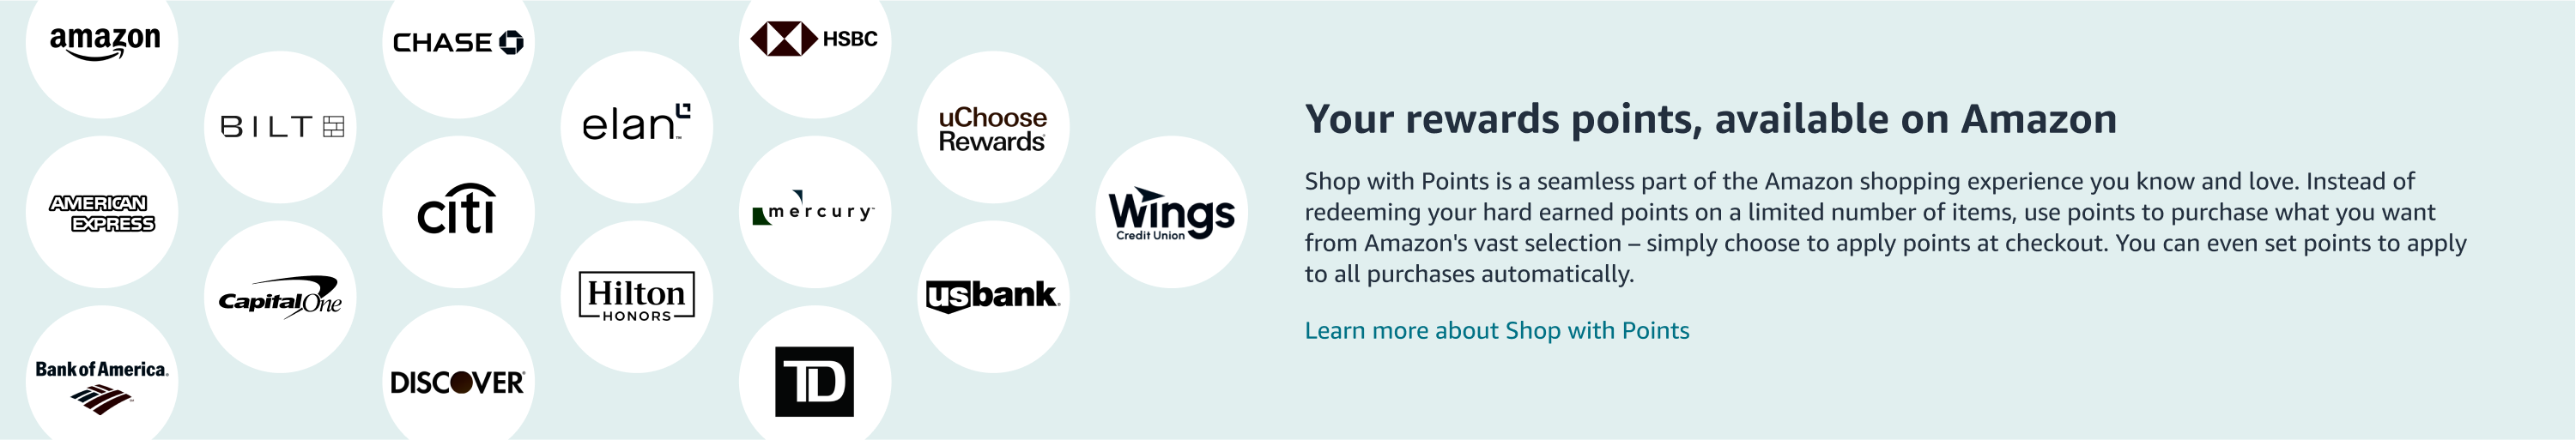 Your rewards points, available on Amazon.com